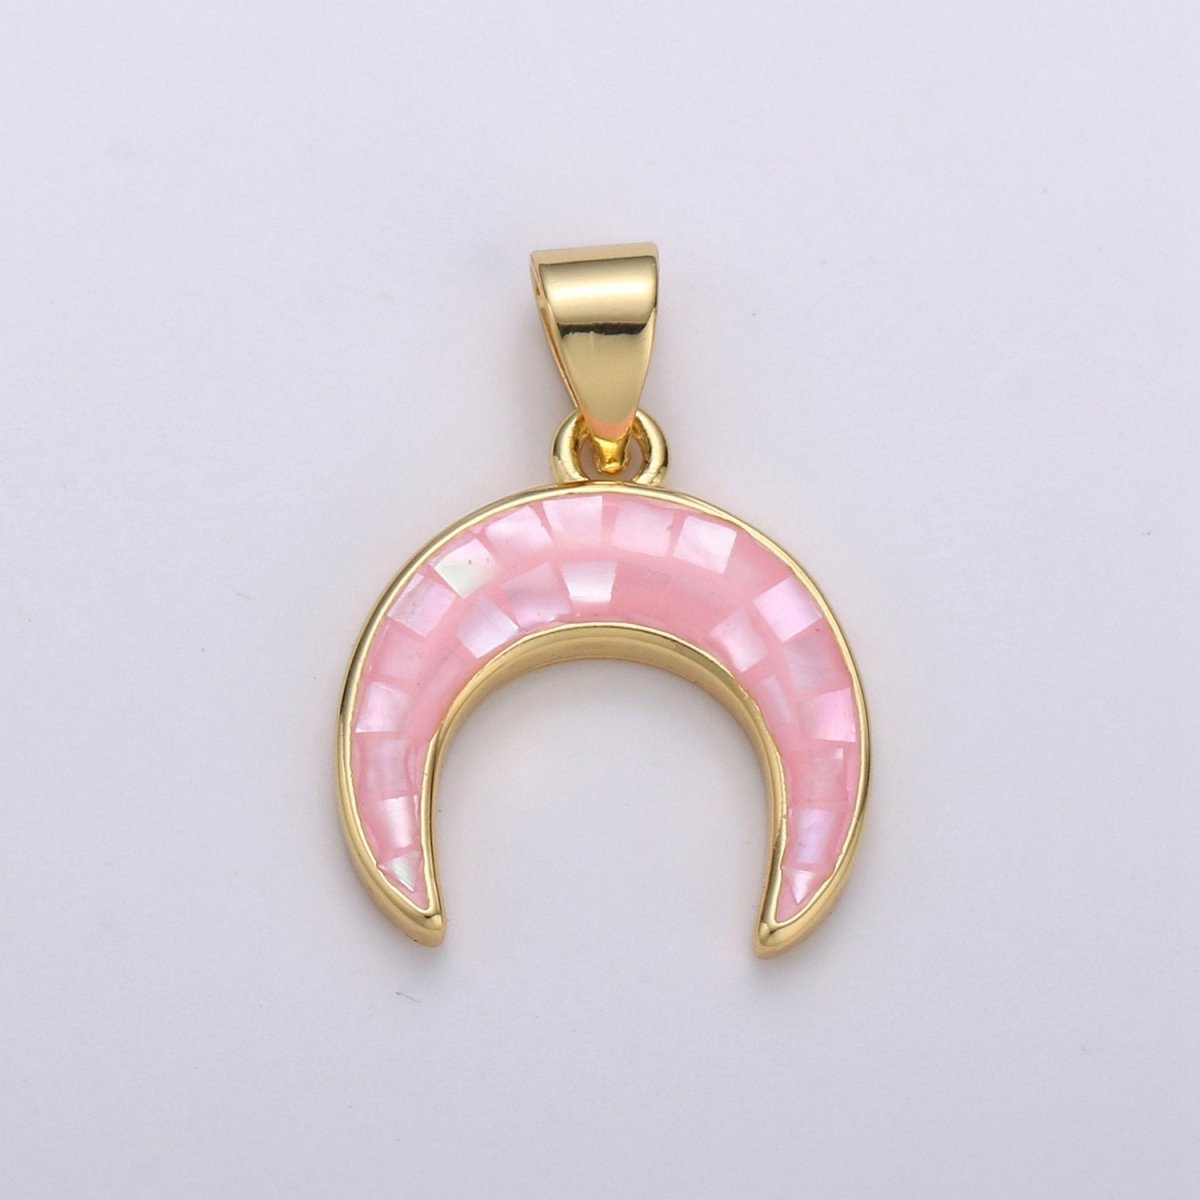 Gold Moon charms , Pink moon pendants, Crescent Moon charm, Dainty charm, Celestial Jewelry pendants in 14k Gold-Plated I-777 - DLUXCA